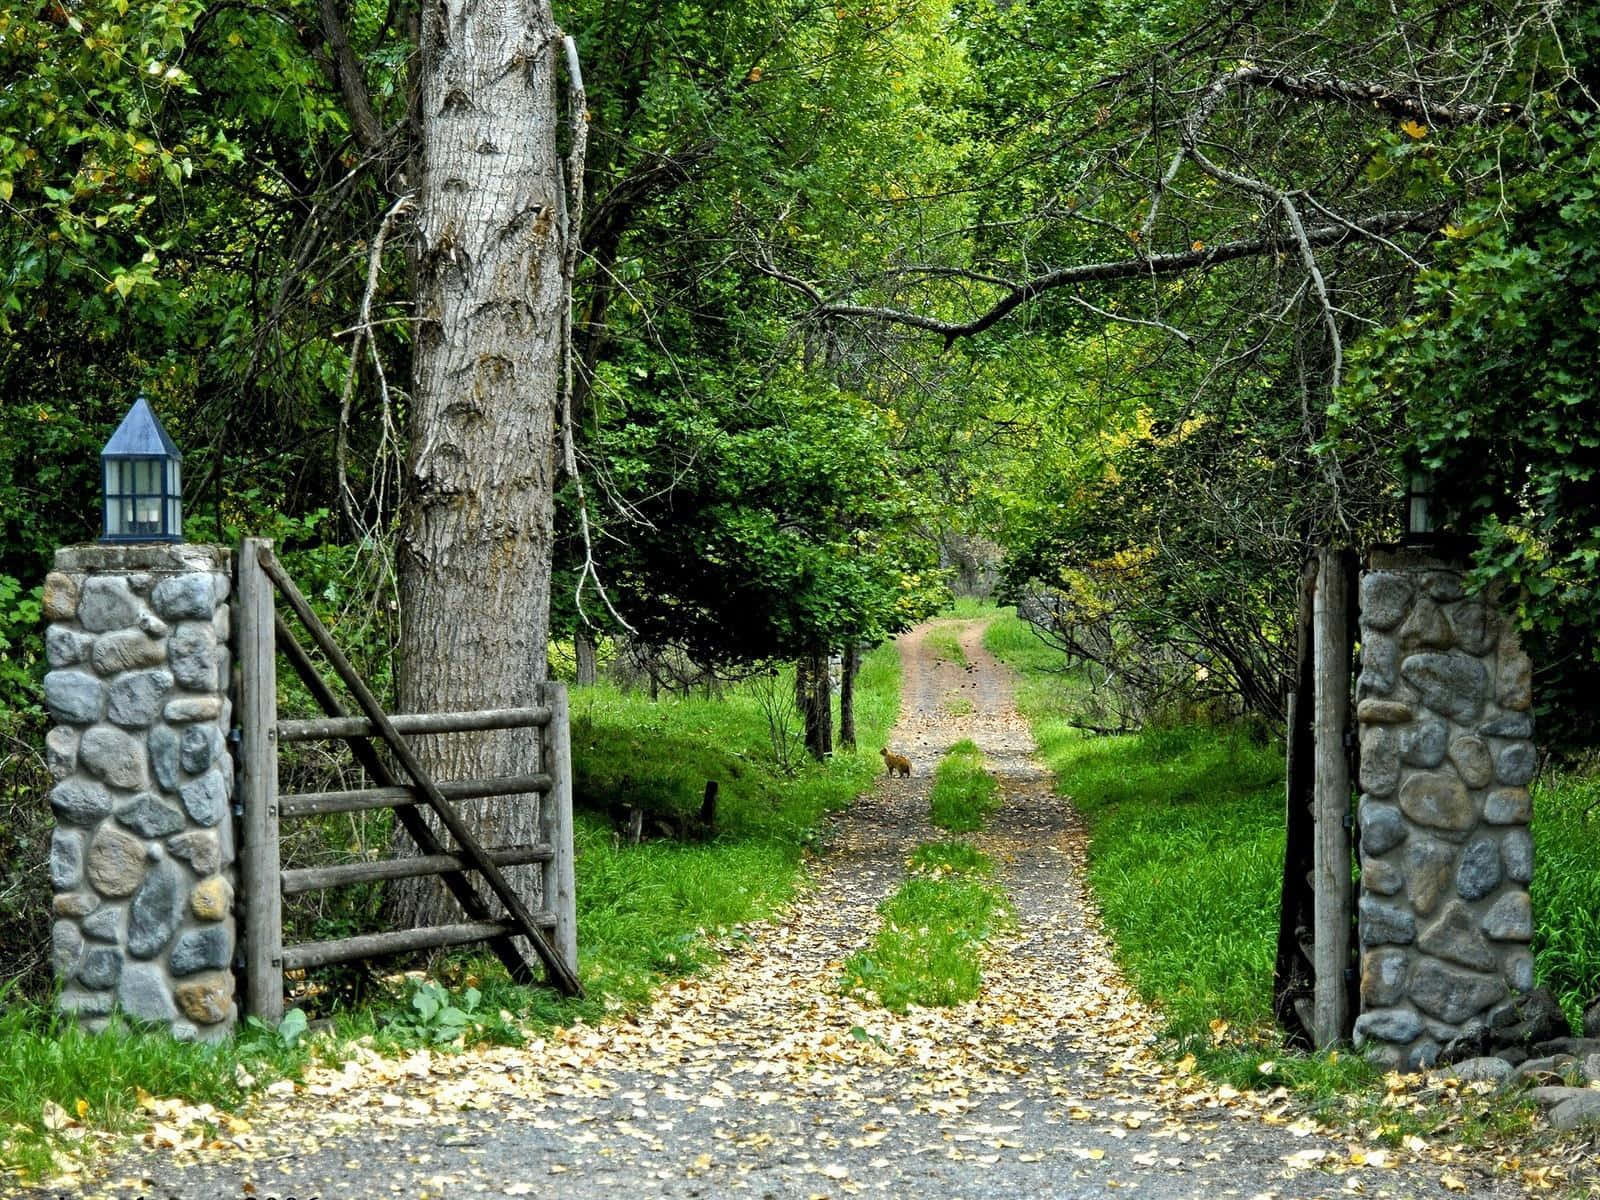 a gate leading to a dirt road with trees and a stone wall